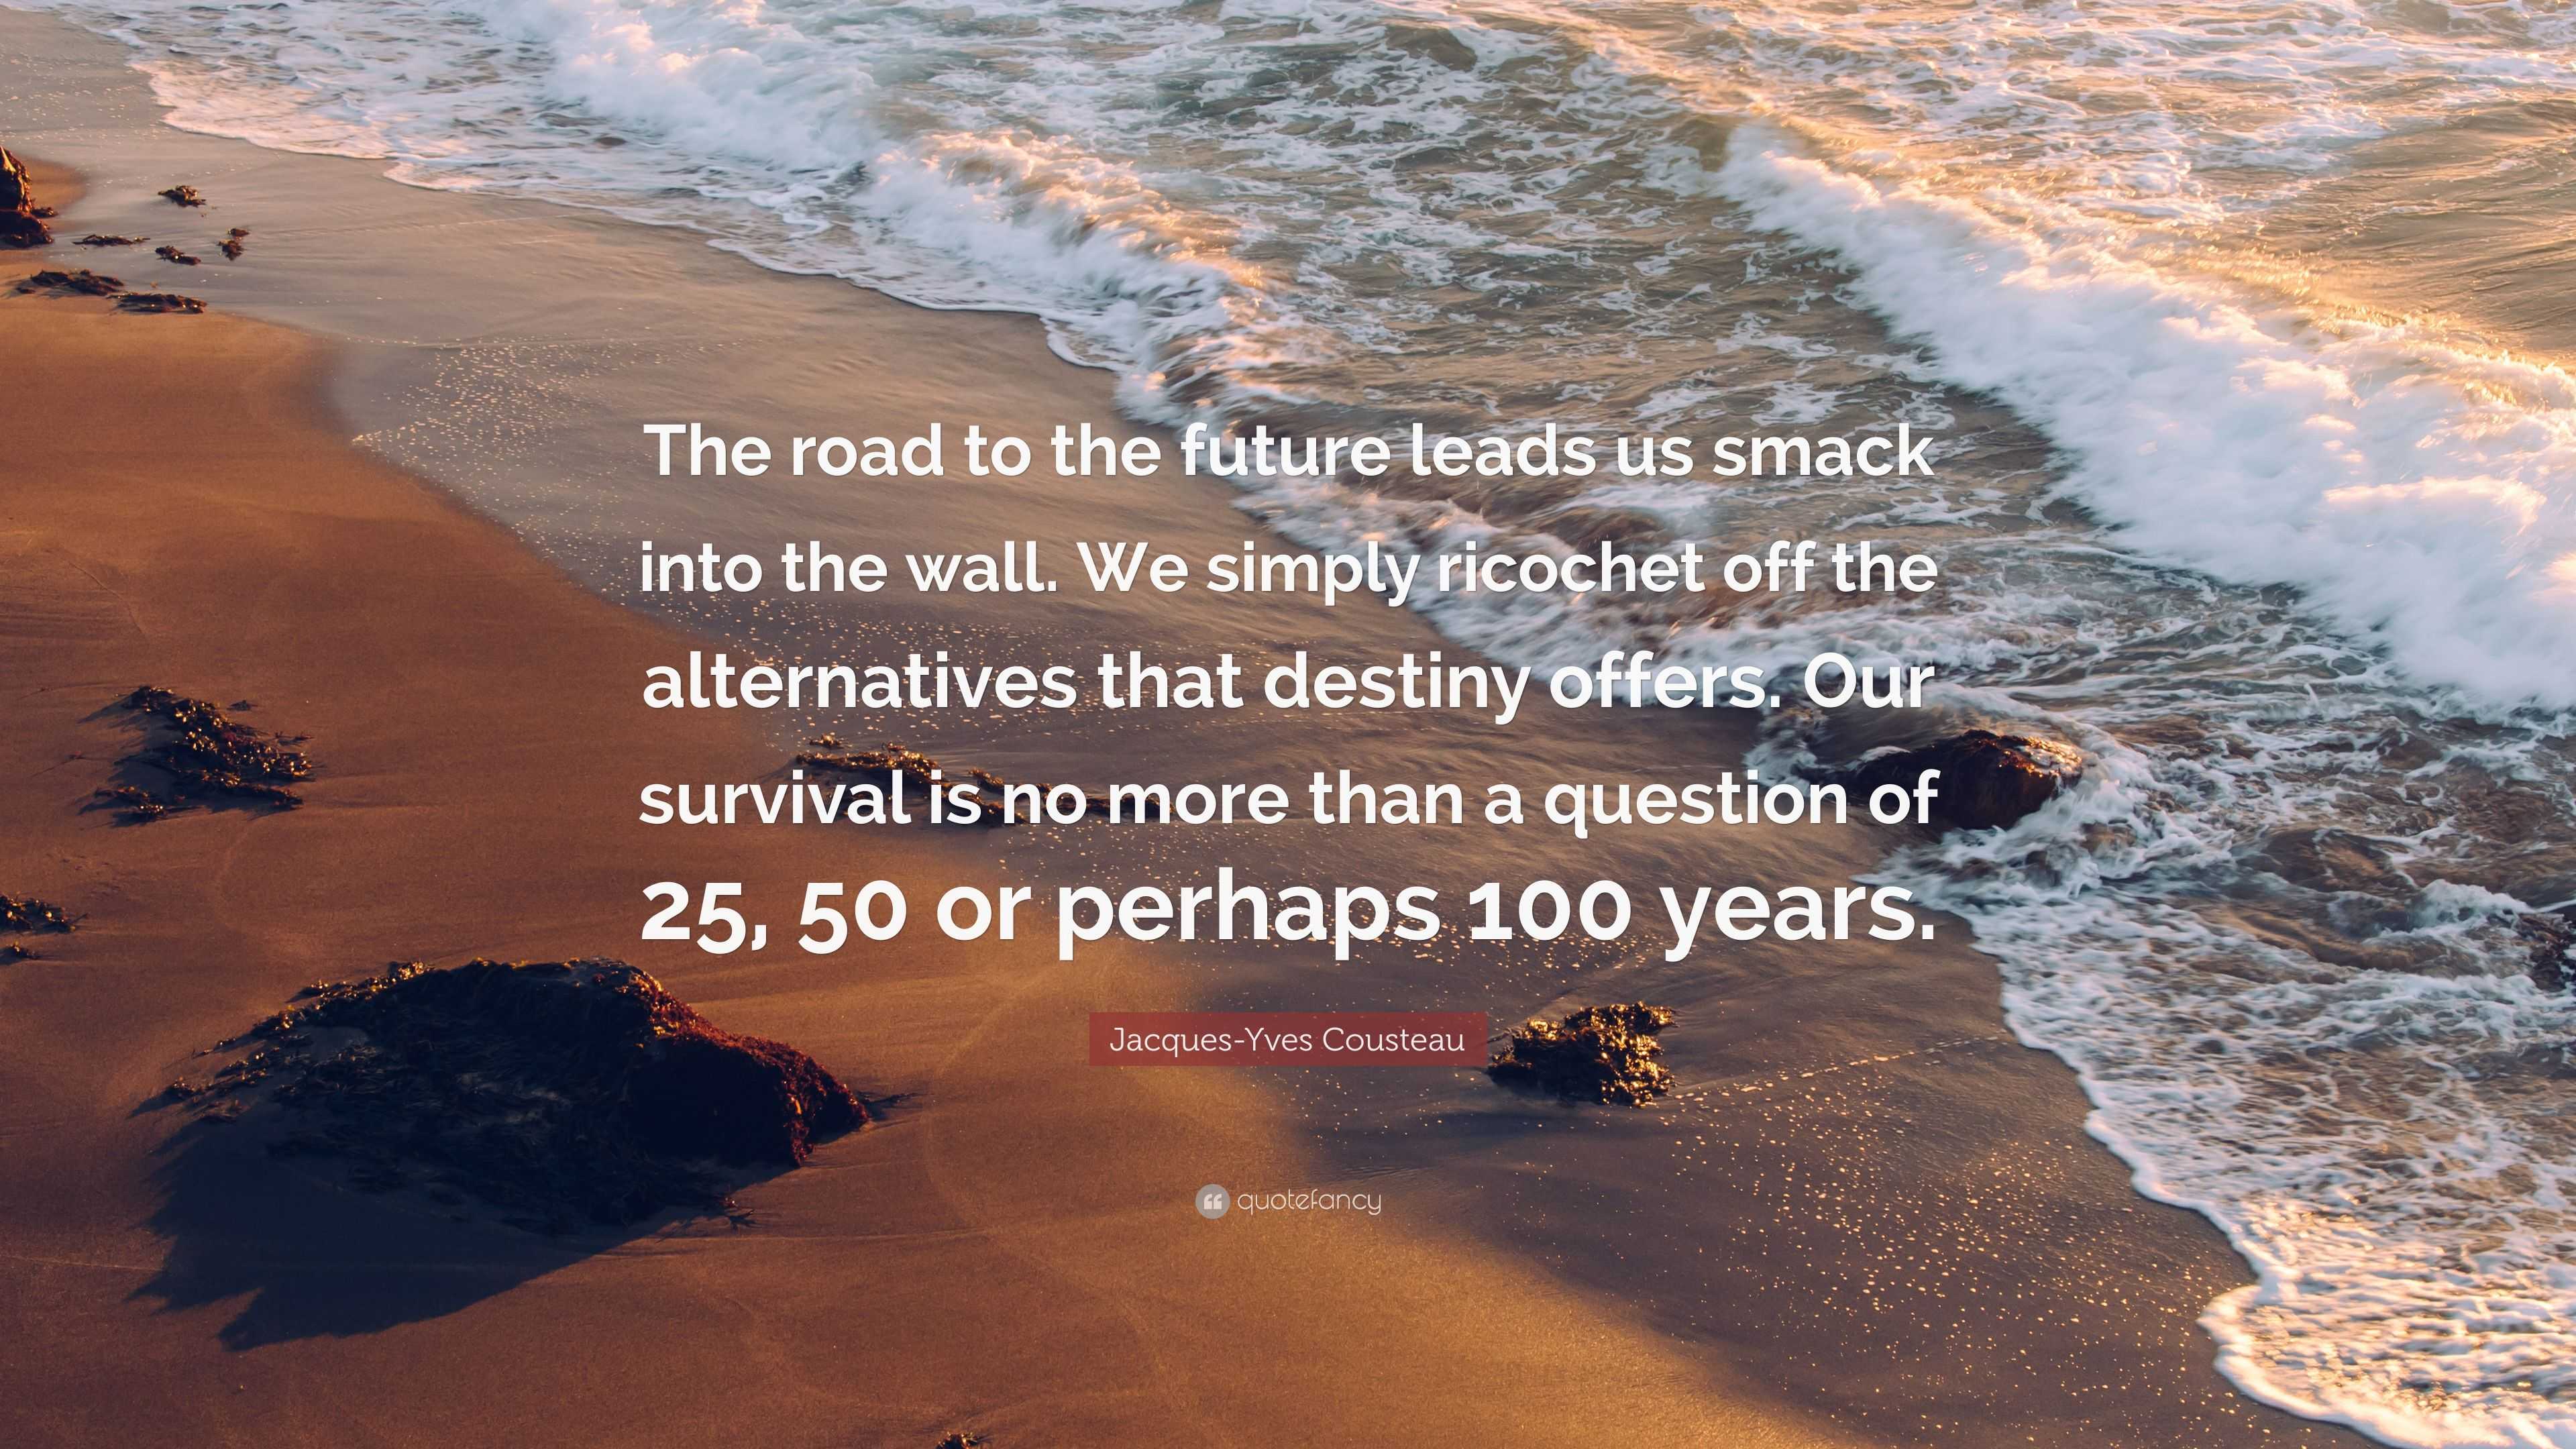 Jacques Yves Cousteau quote: The road to the future leads us smack into the